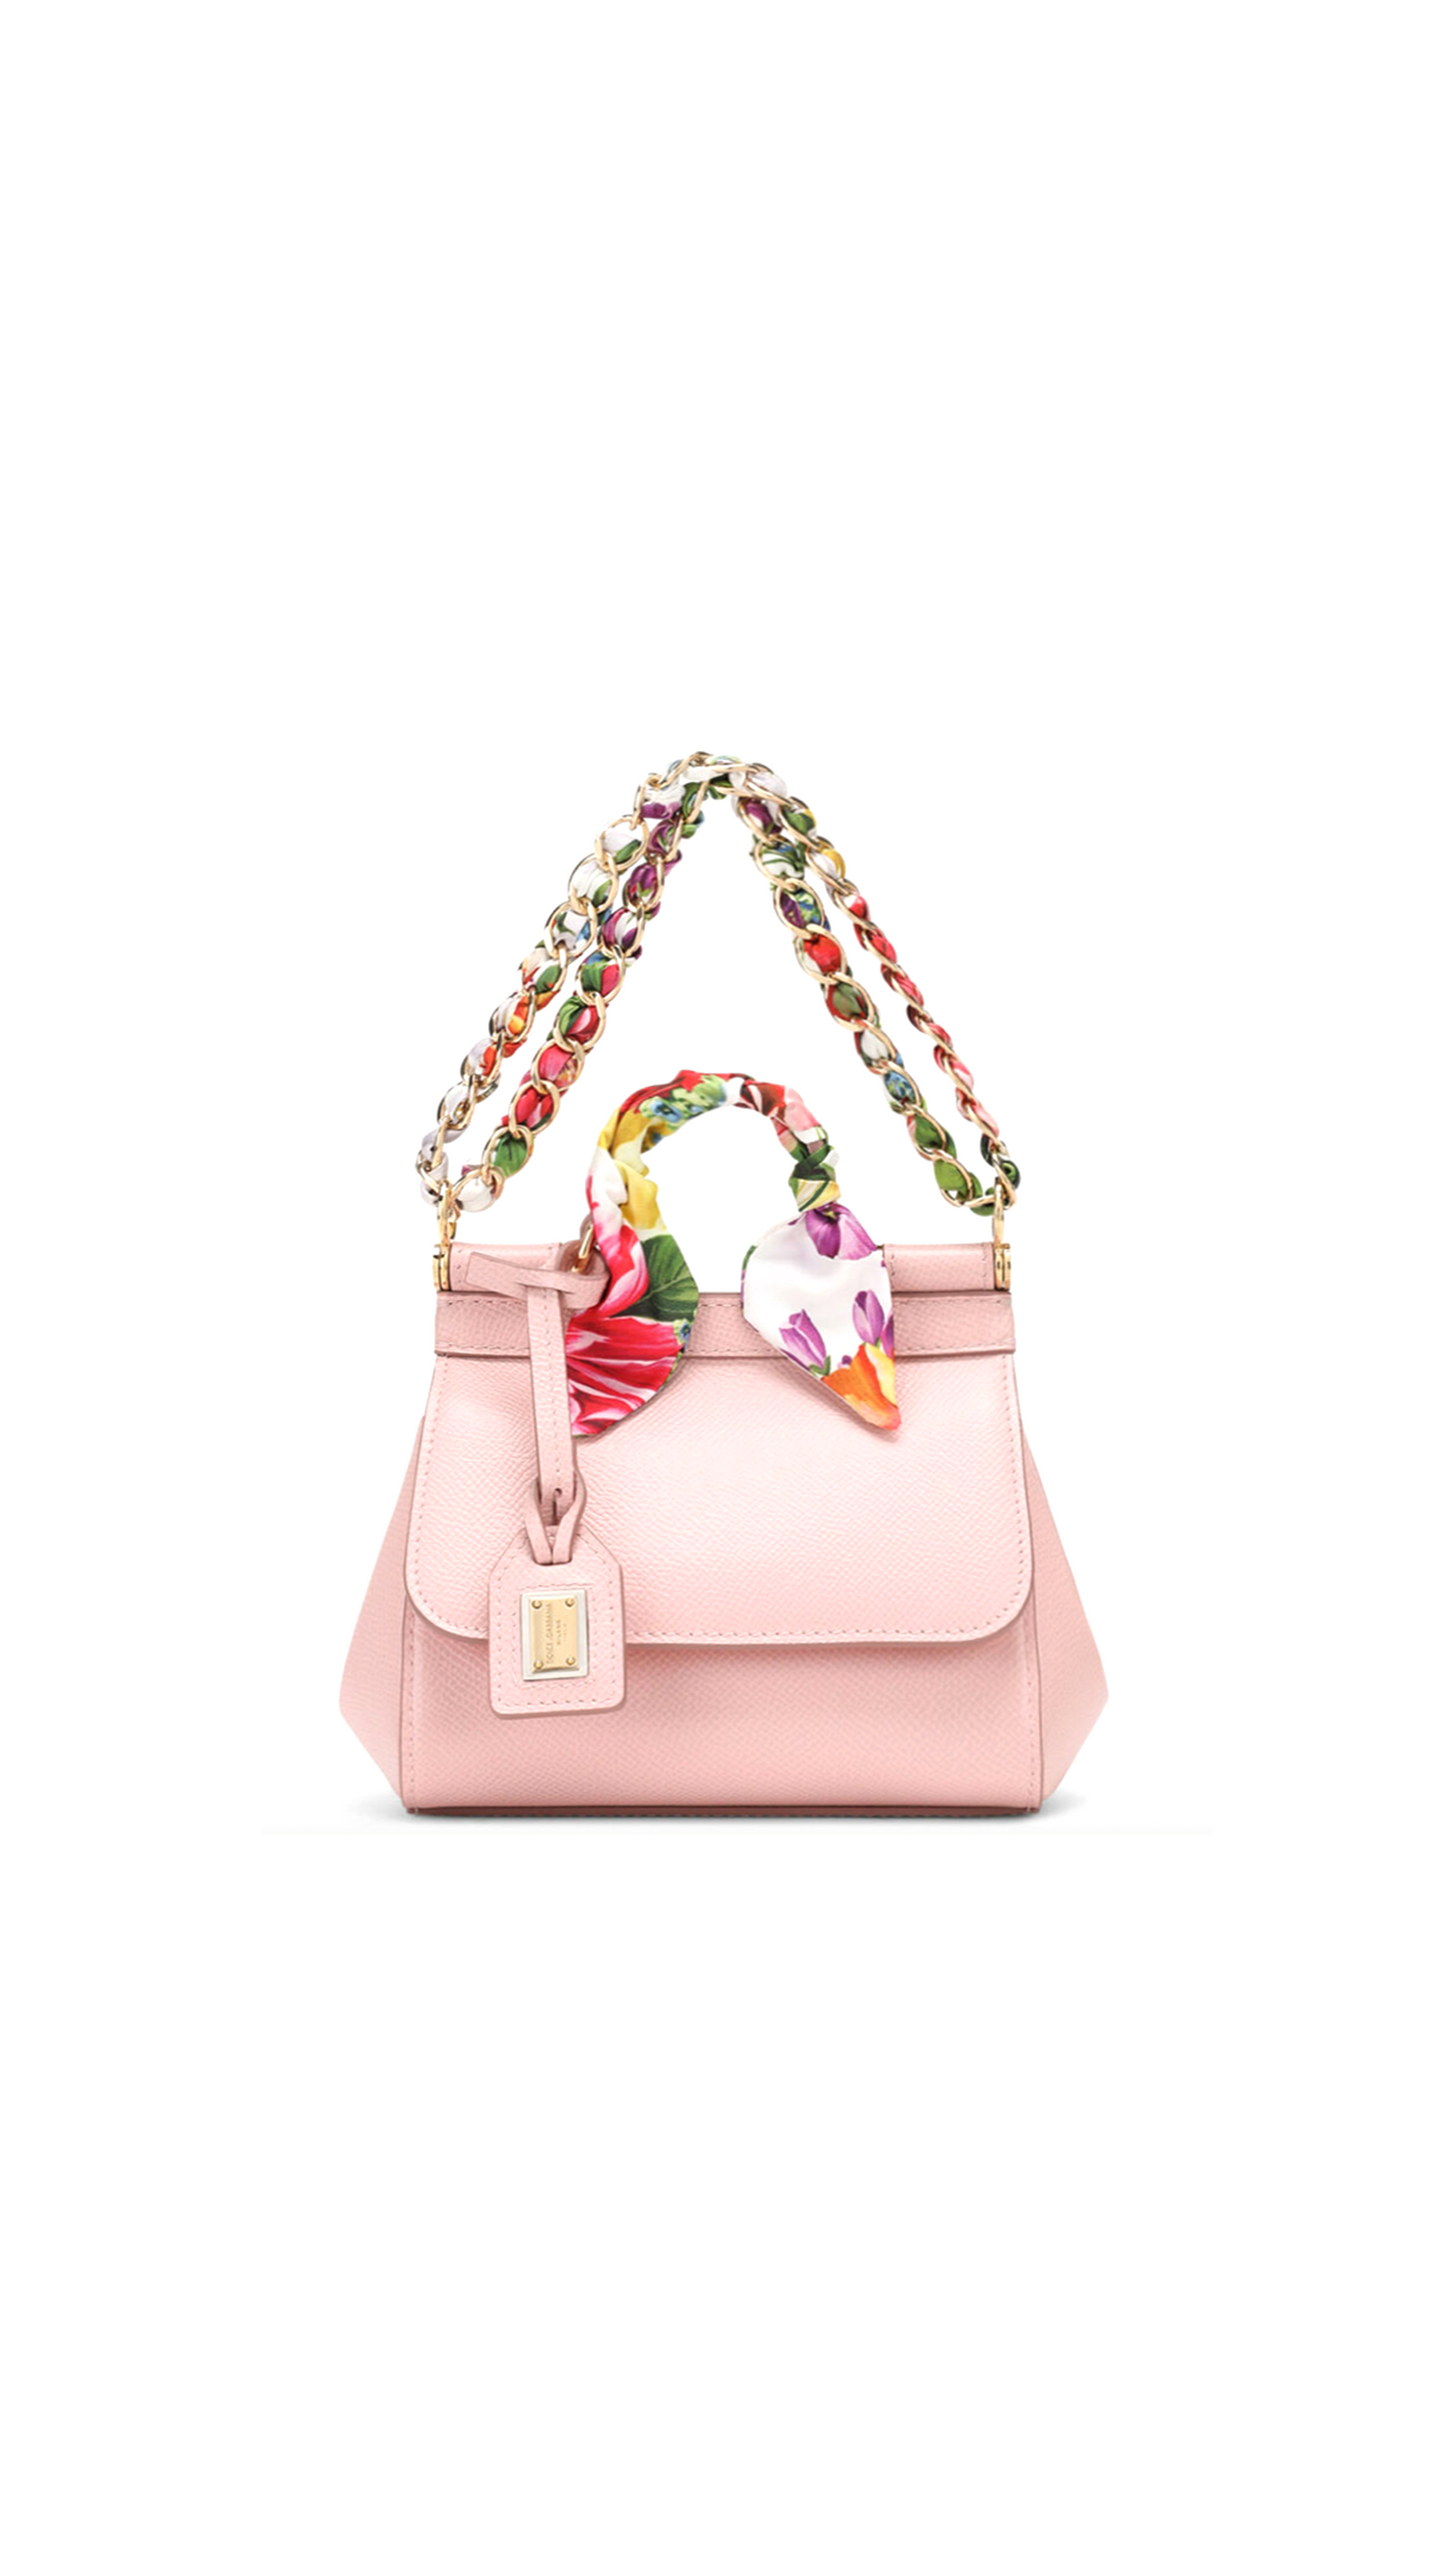 Sicily Mini Bag in Dauphine Calfskin with Scarf - Pink